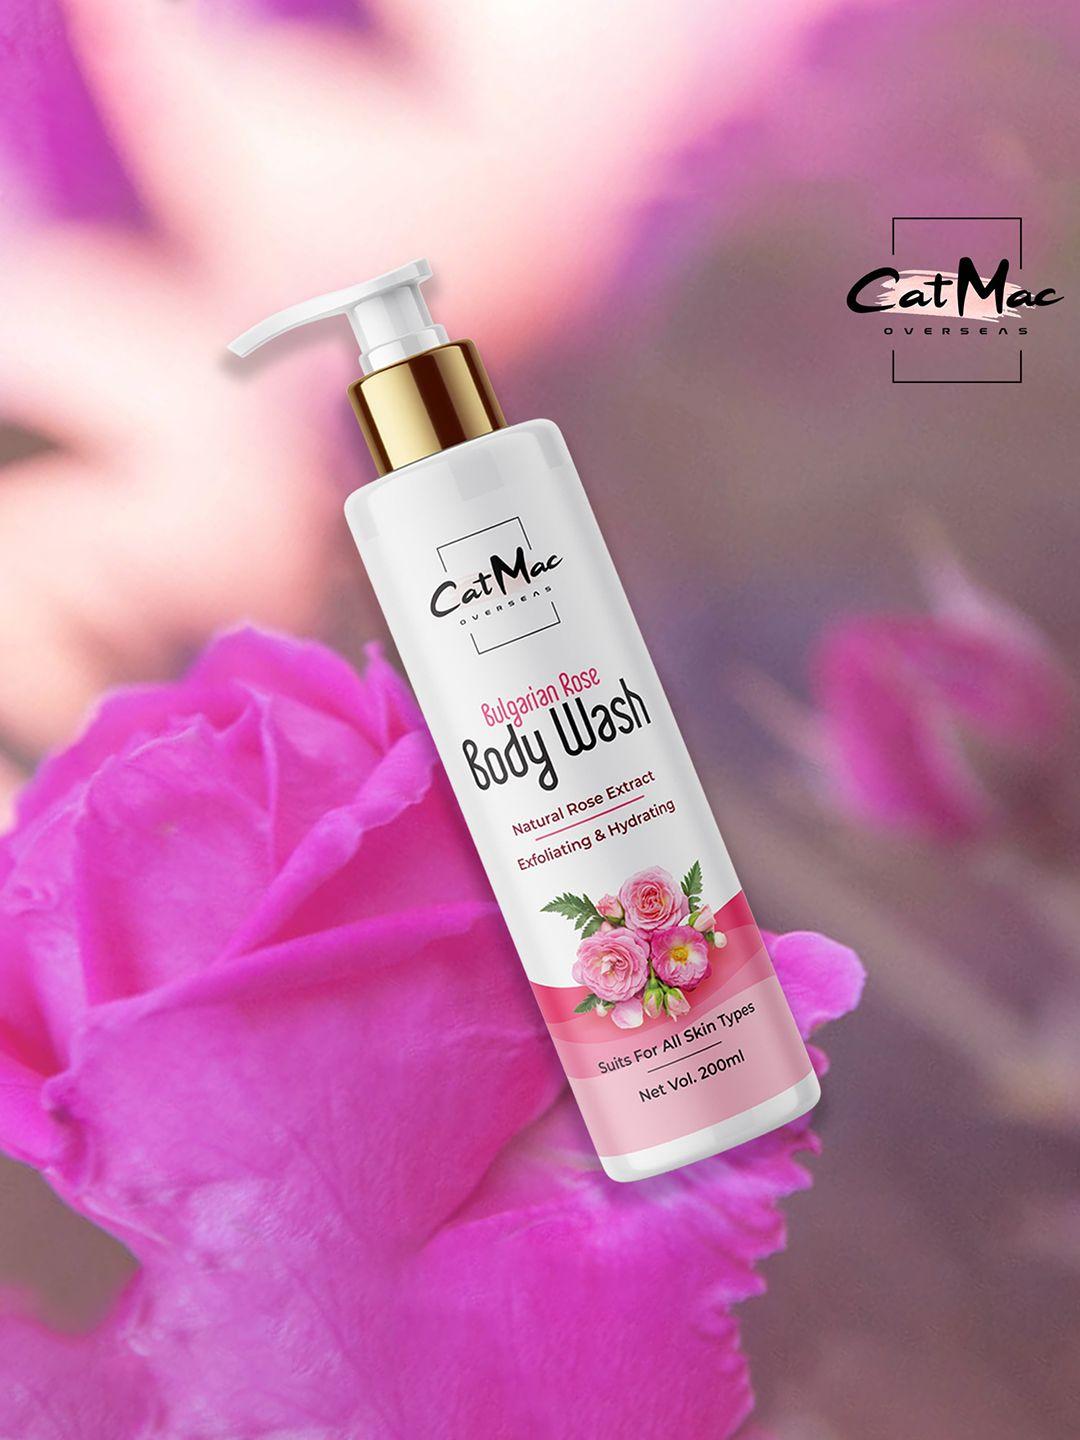 catmac bulgarian rose body wash with lotus & multi fruits extracts - 200 ml